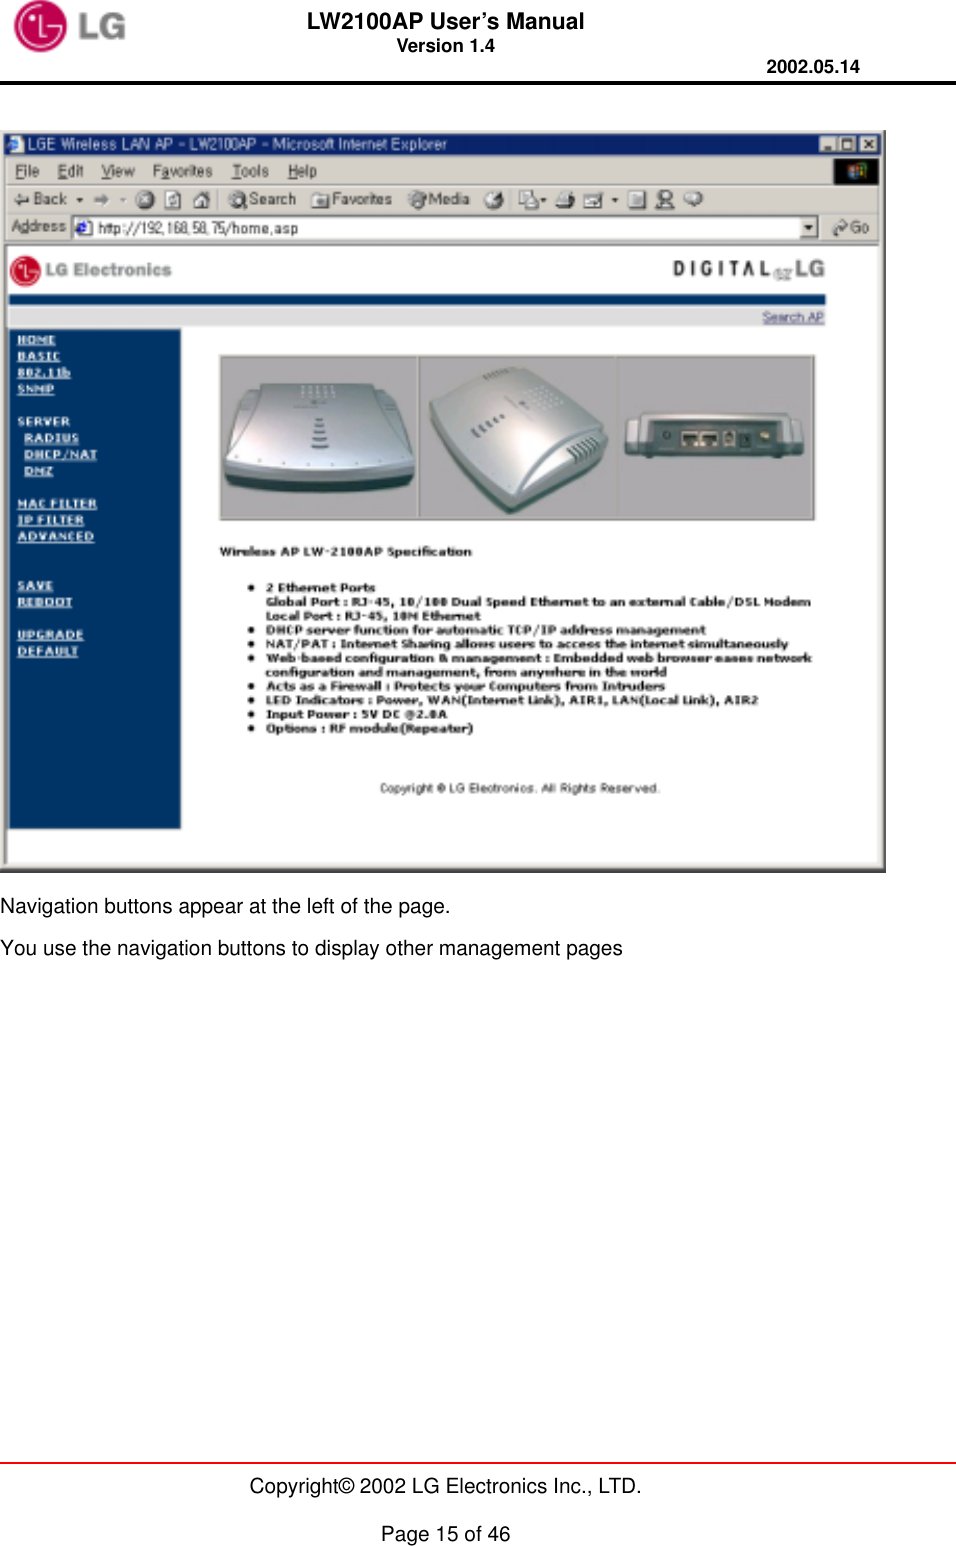 LW2100AP User’s Manual Version 1.4 2002.05.14   Copyright© 2002 LG Electronics Inc., LTD.  Page 15 of 46   Navigation buttons appear at the left of the page.   You use the navigation buttons to display other management pages 